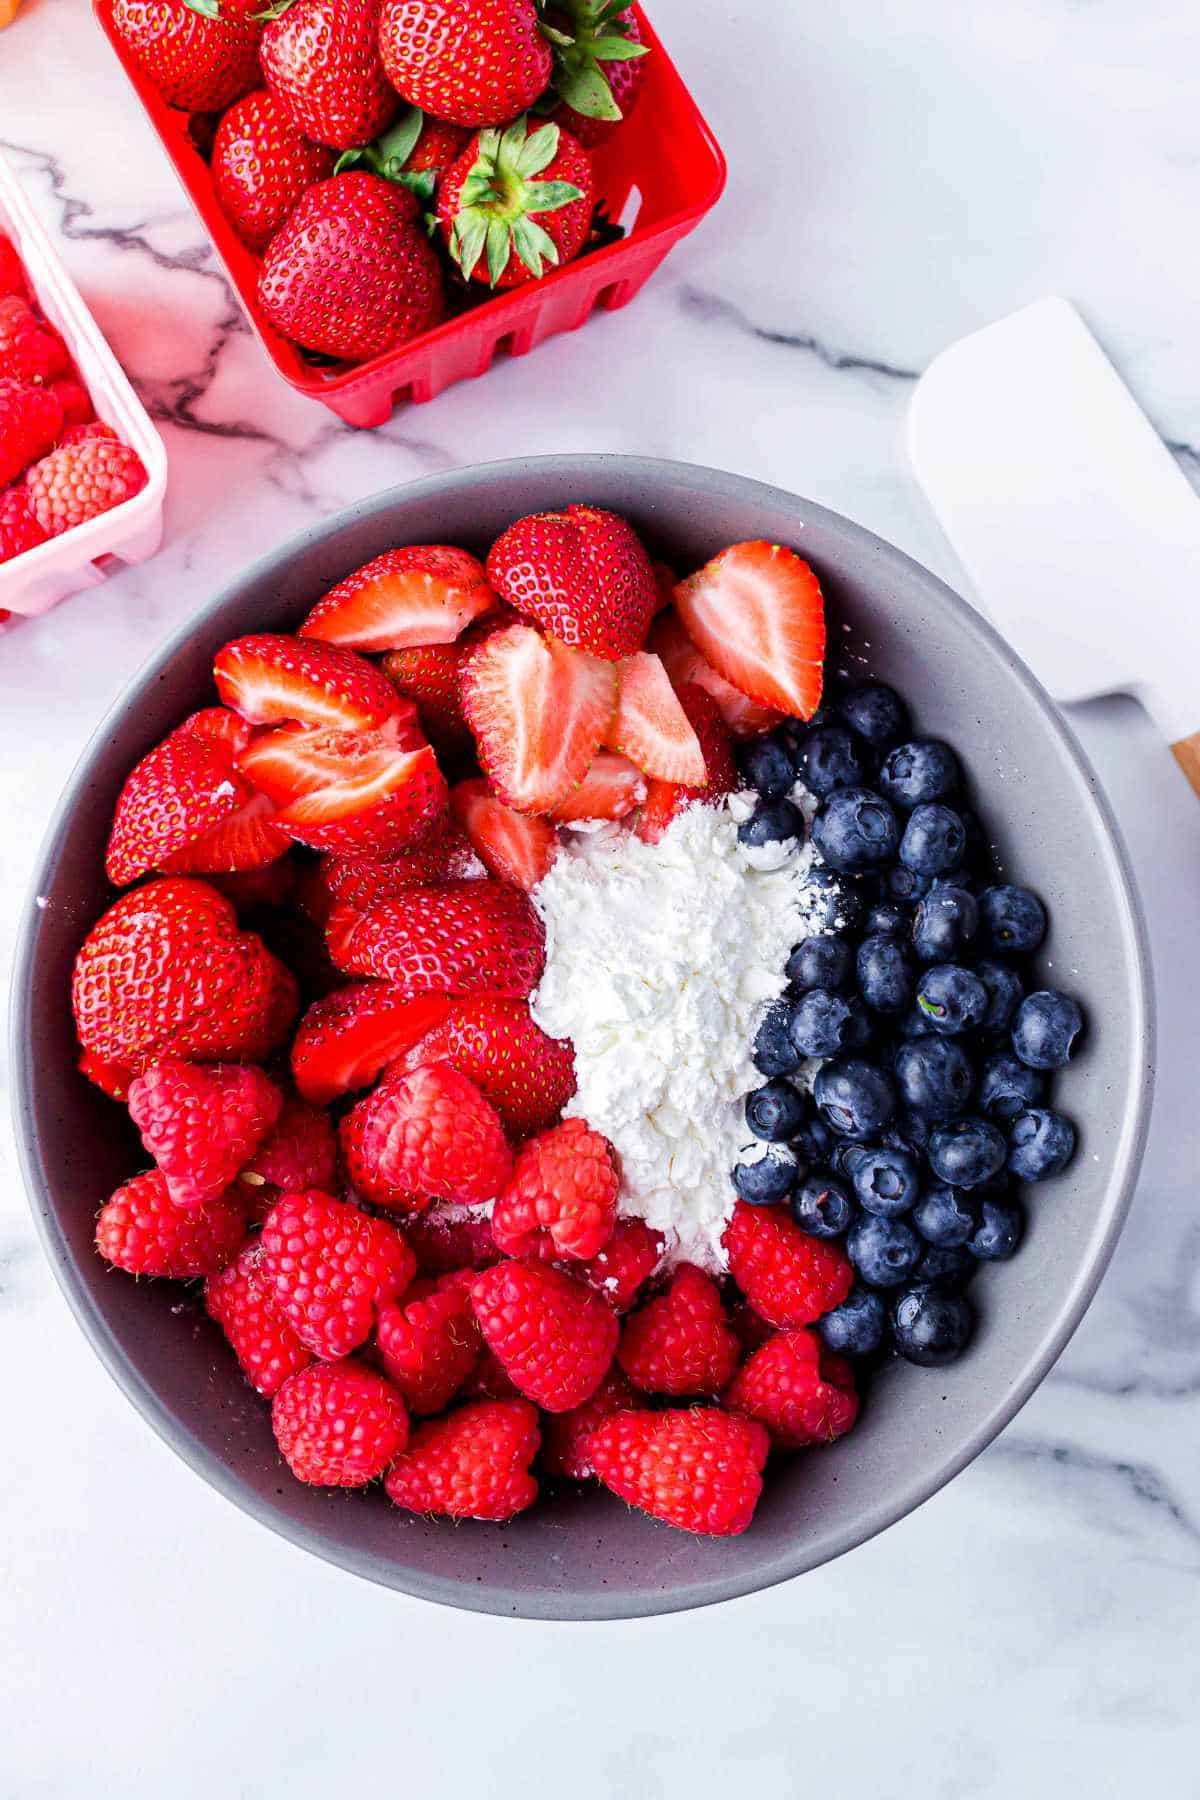 strawberries, blueberries, and raspberries in a bowl with some sugar.